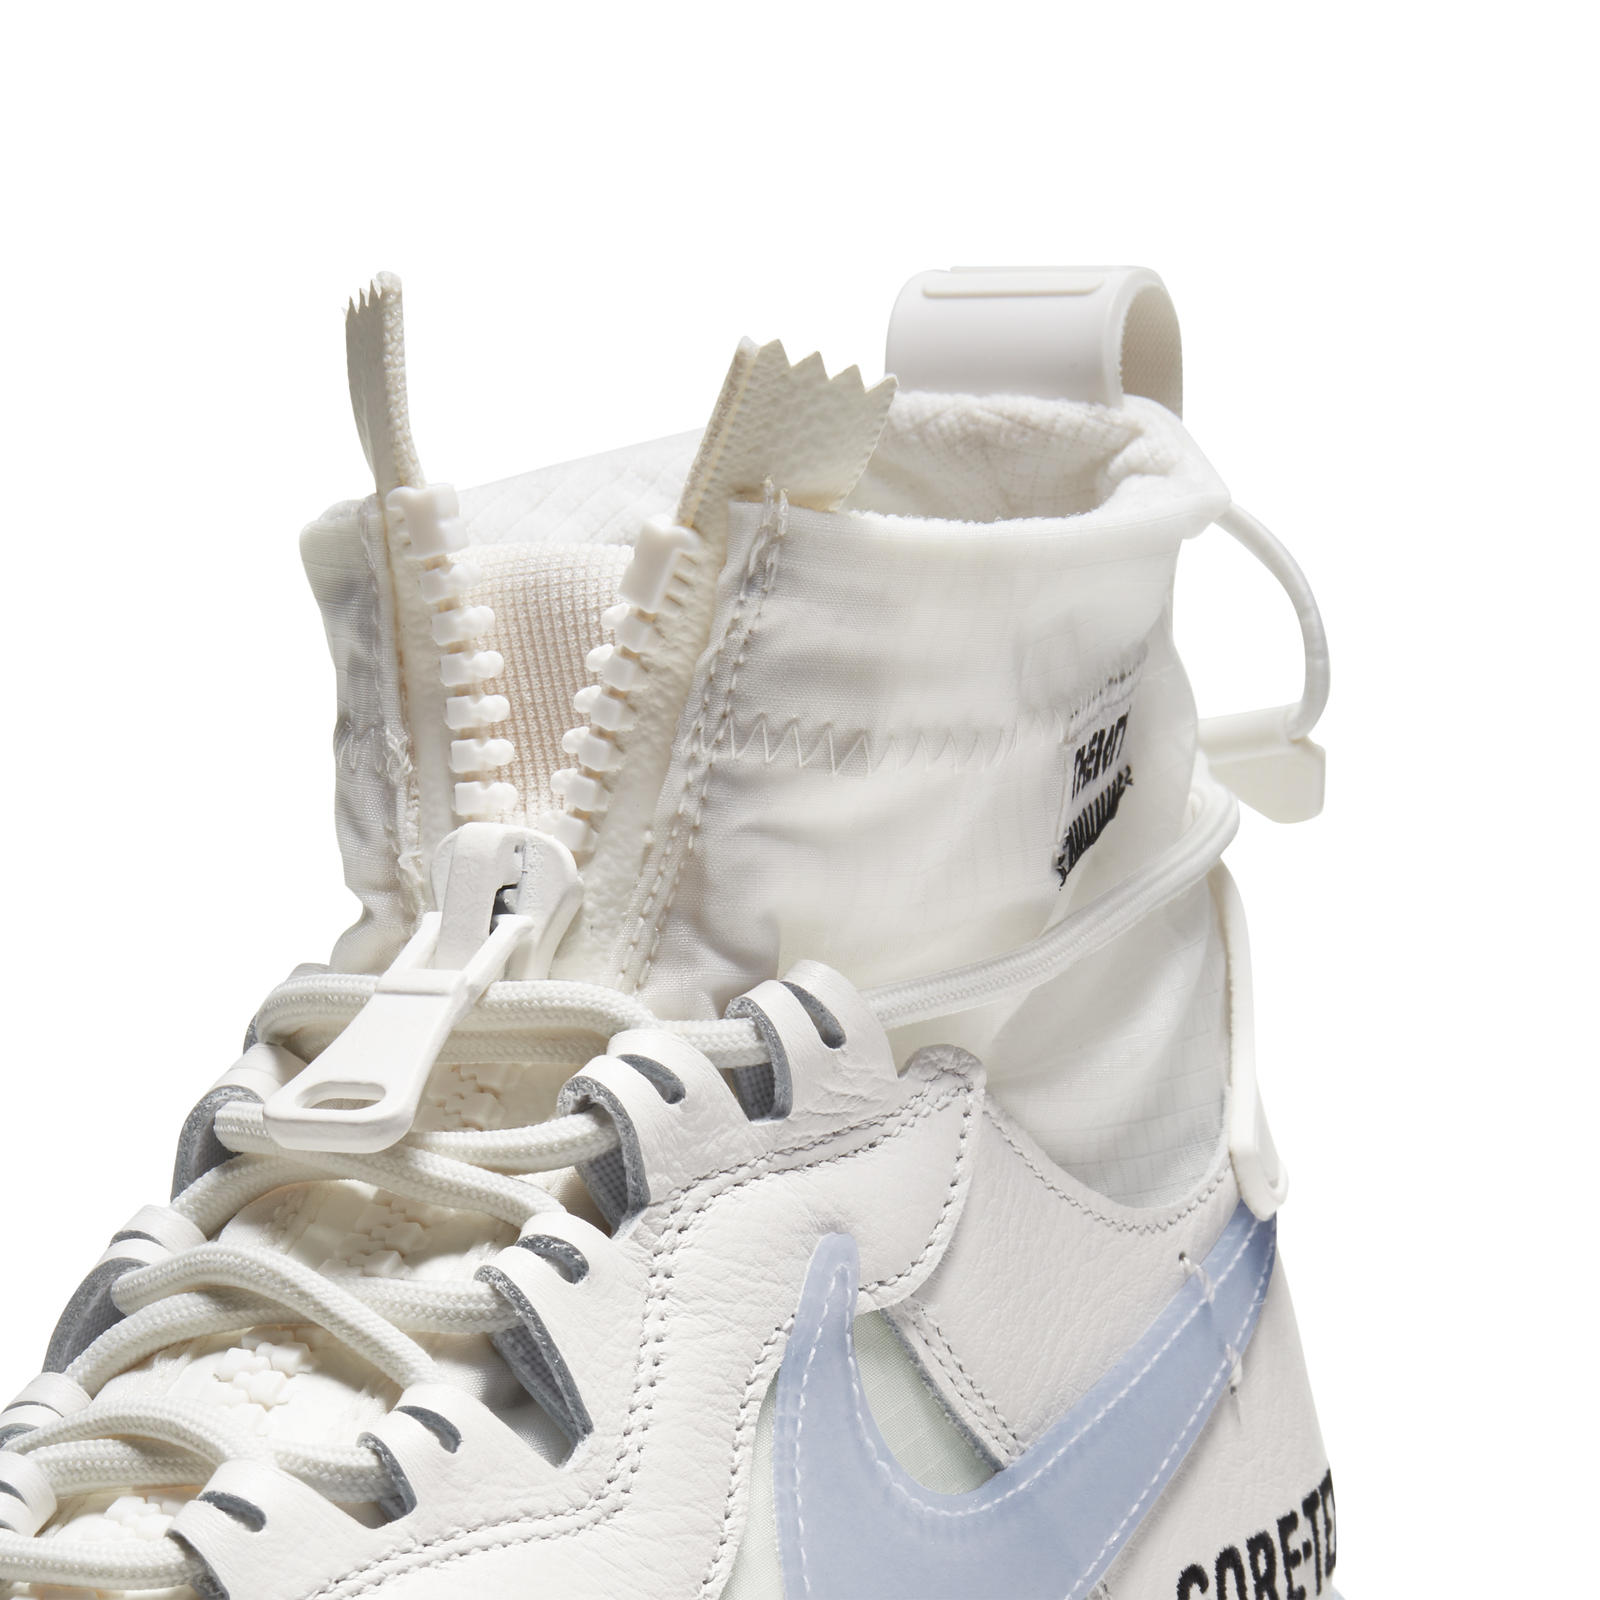 zebra rijkdom Cyclopen Nike Air Force 1 High/Low and GORE-TEX Made for Colder Days | Grailify